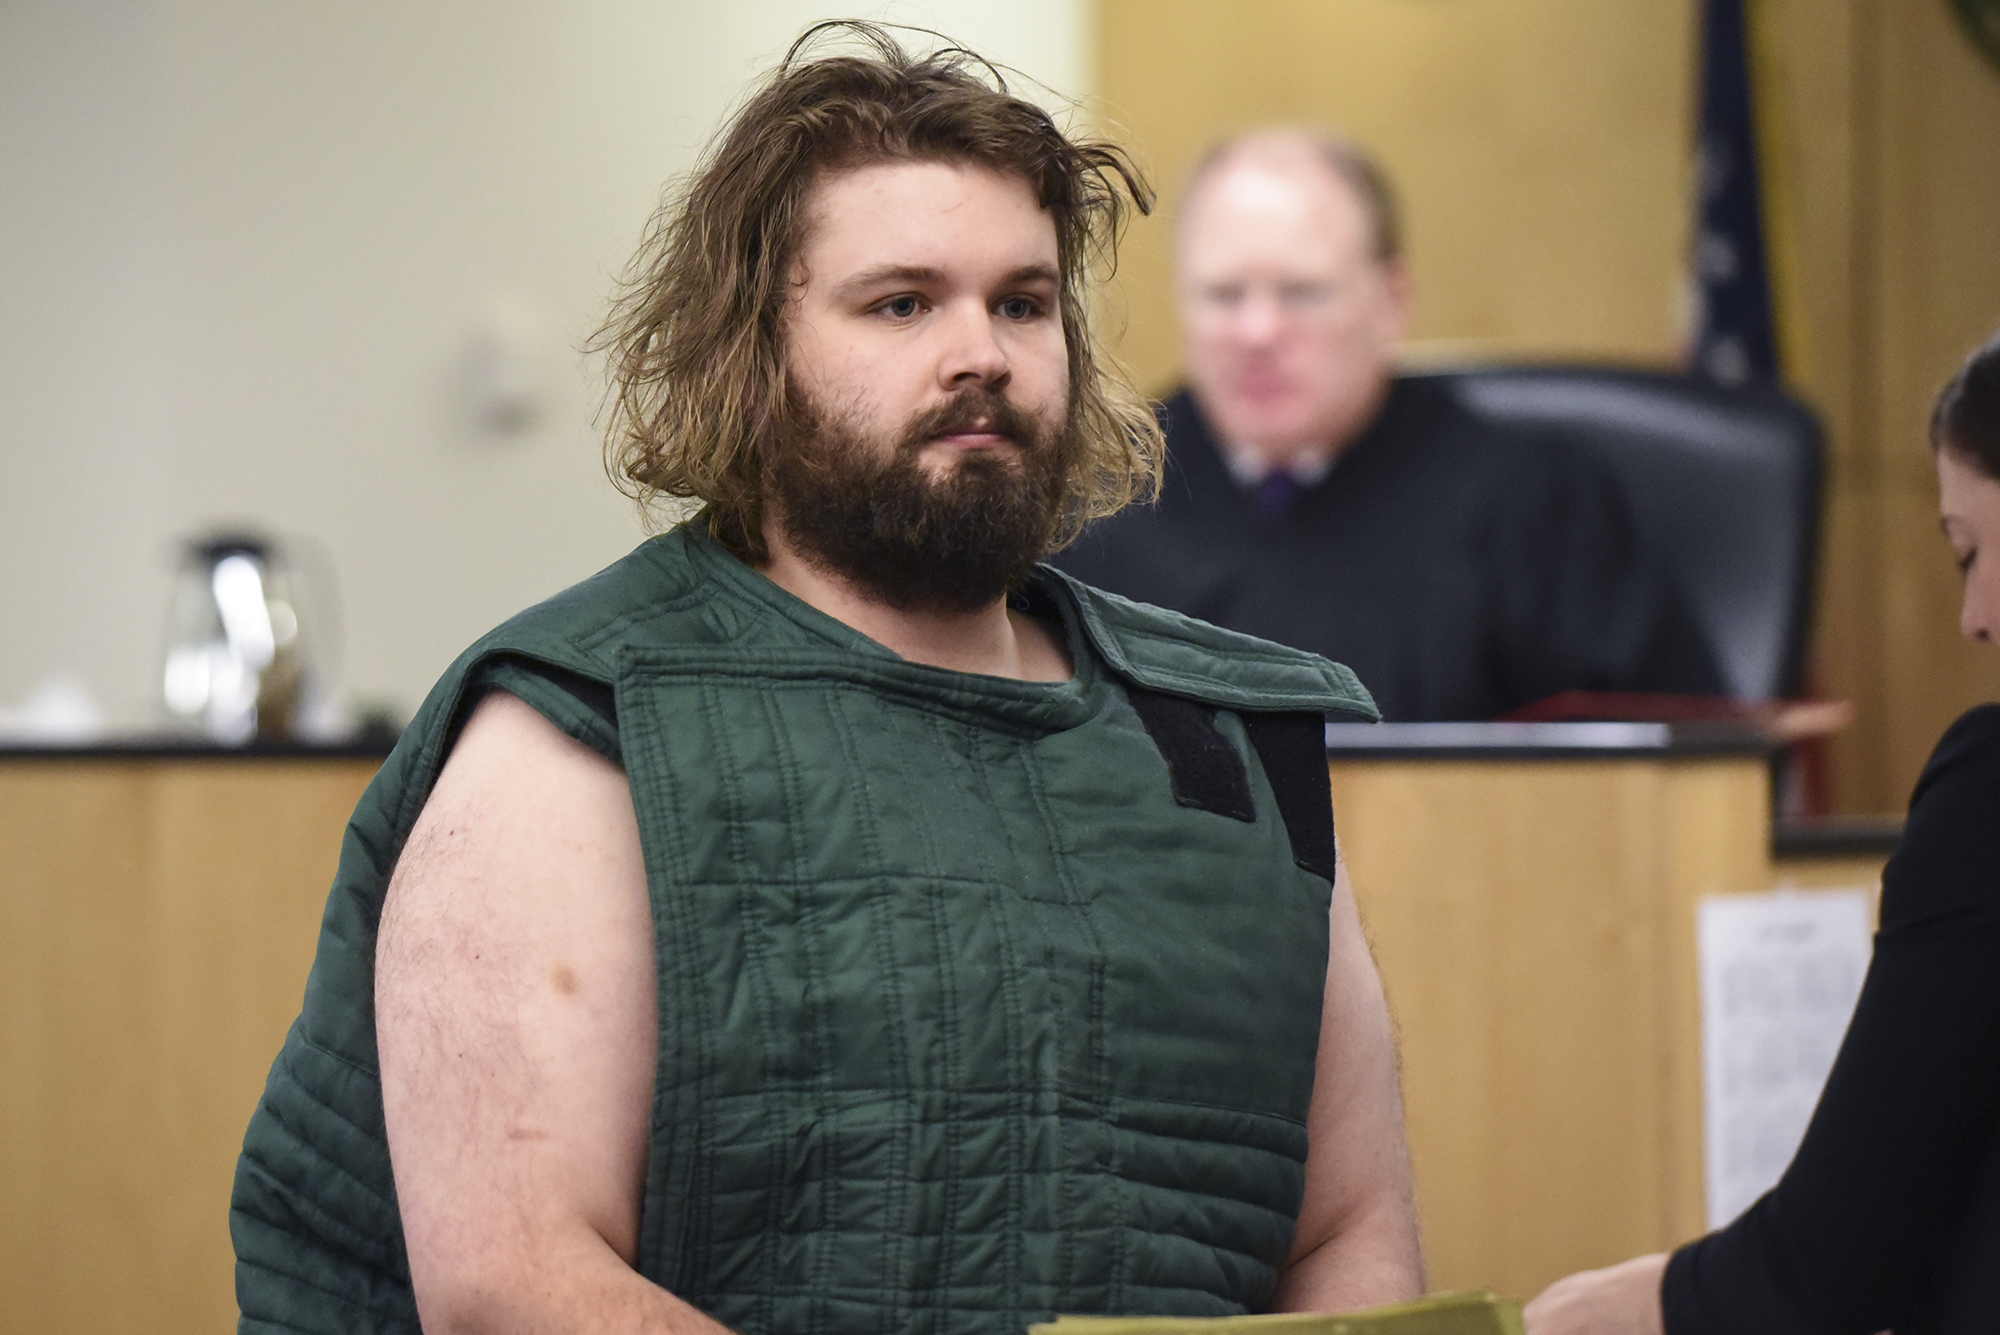 Vadim Paliy appears Monday in Clark County Superior Court for allegedly shooting his girlfriend during an altercation Saturday at their Ridgefield apartment.